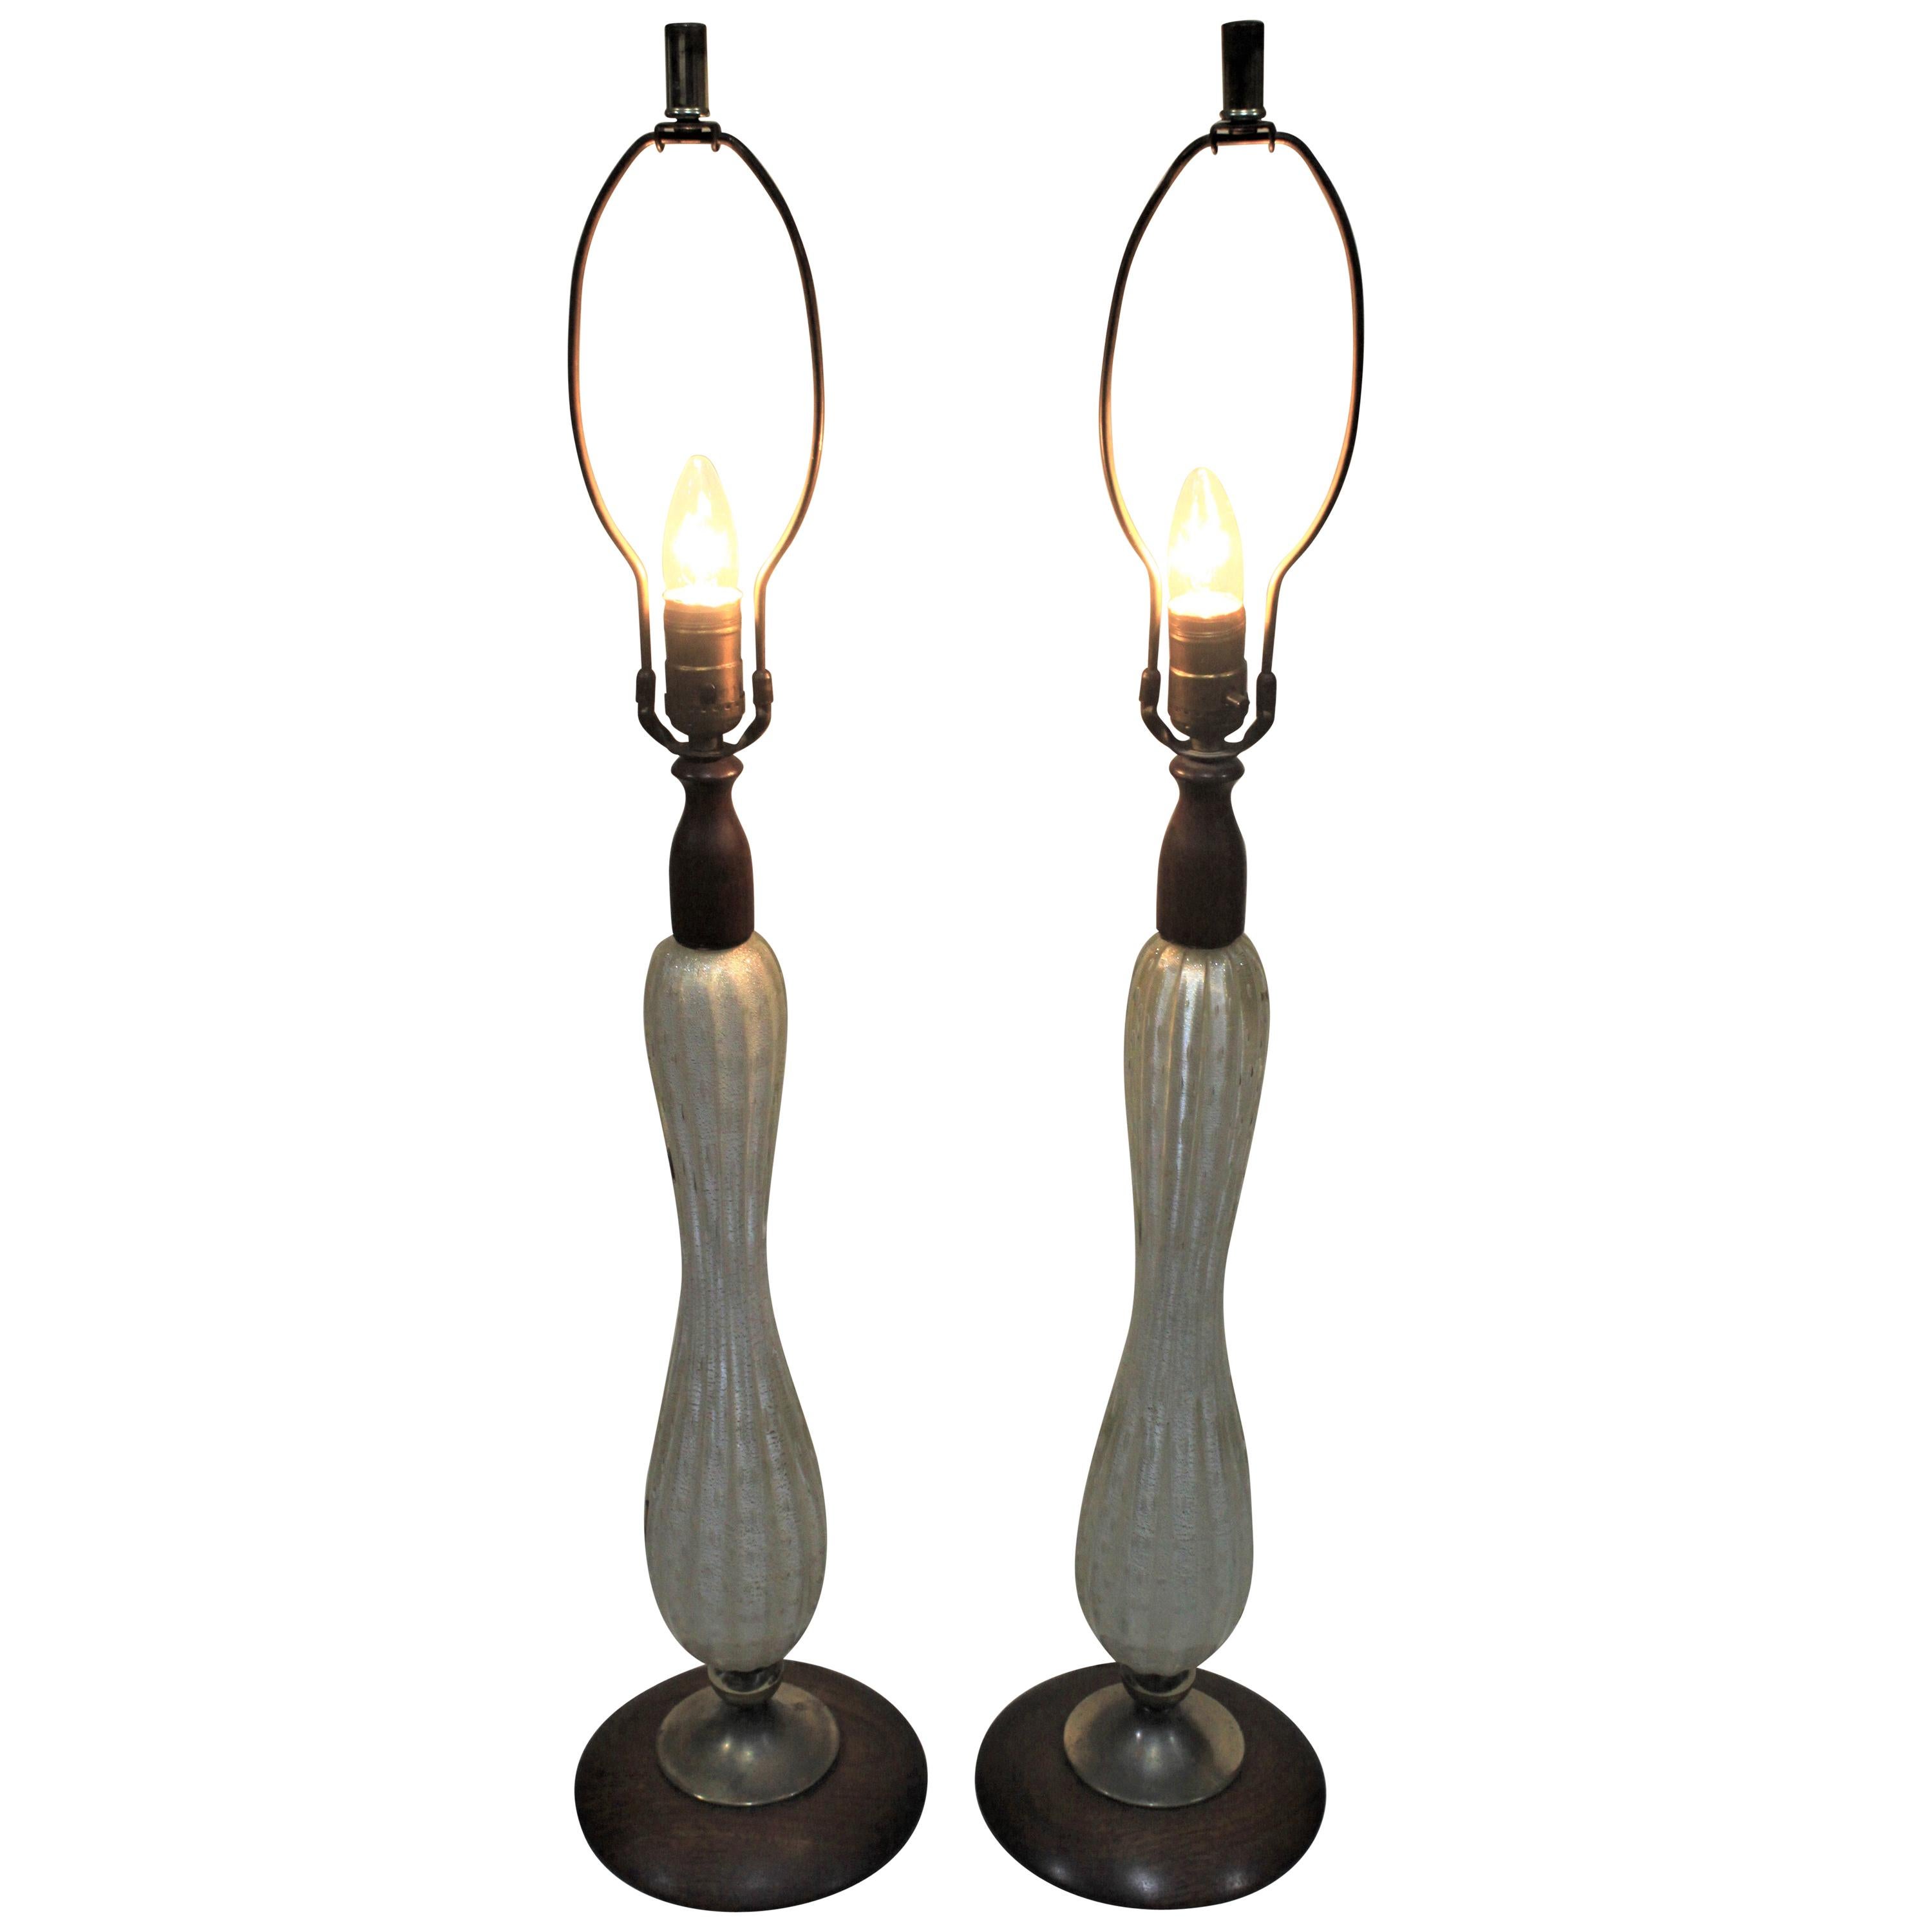 Pair of Mid-Century Modern Murano Art Glass Table Lamps with Teak Accents